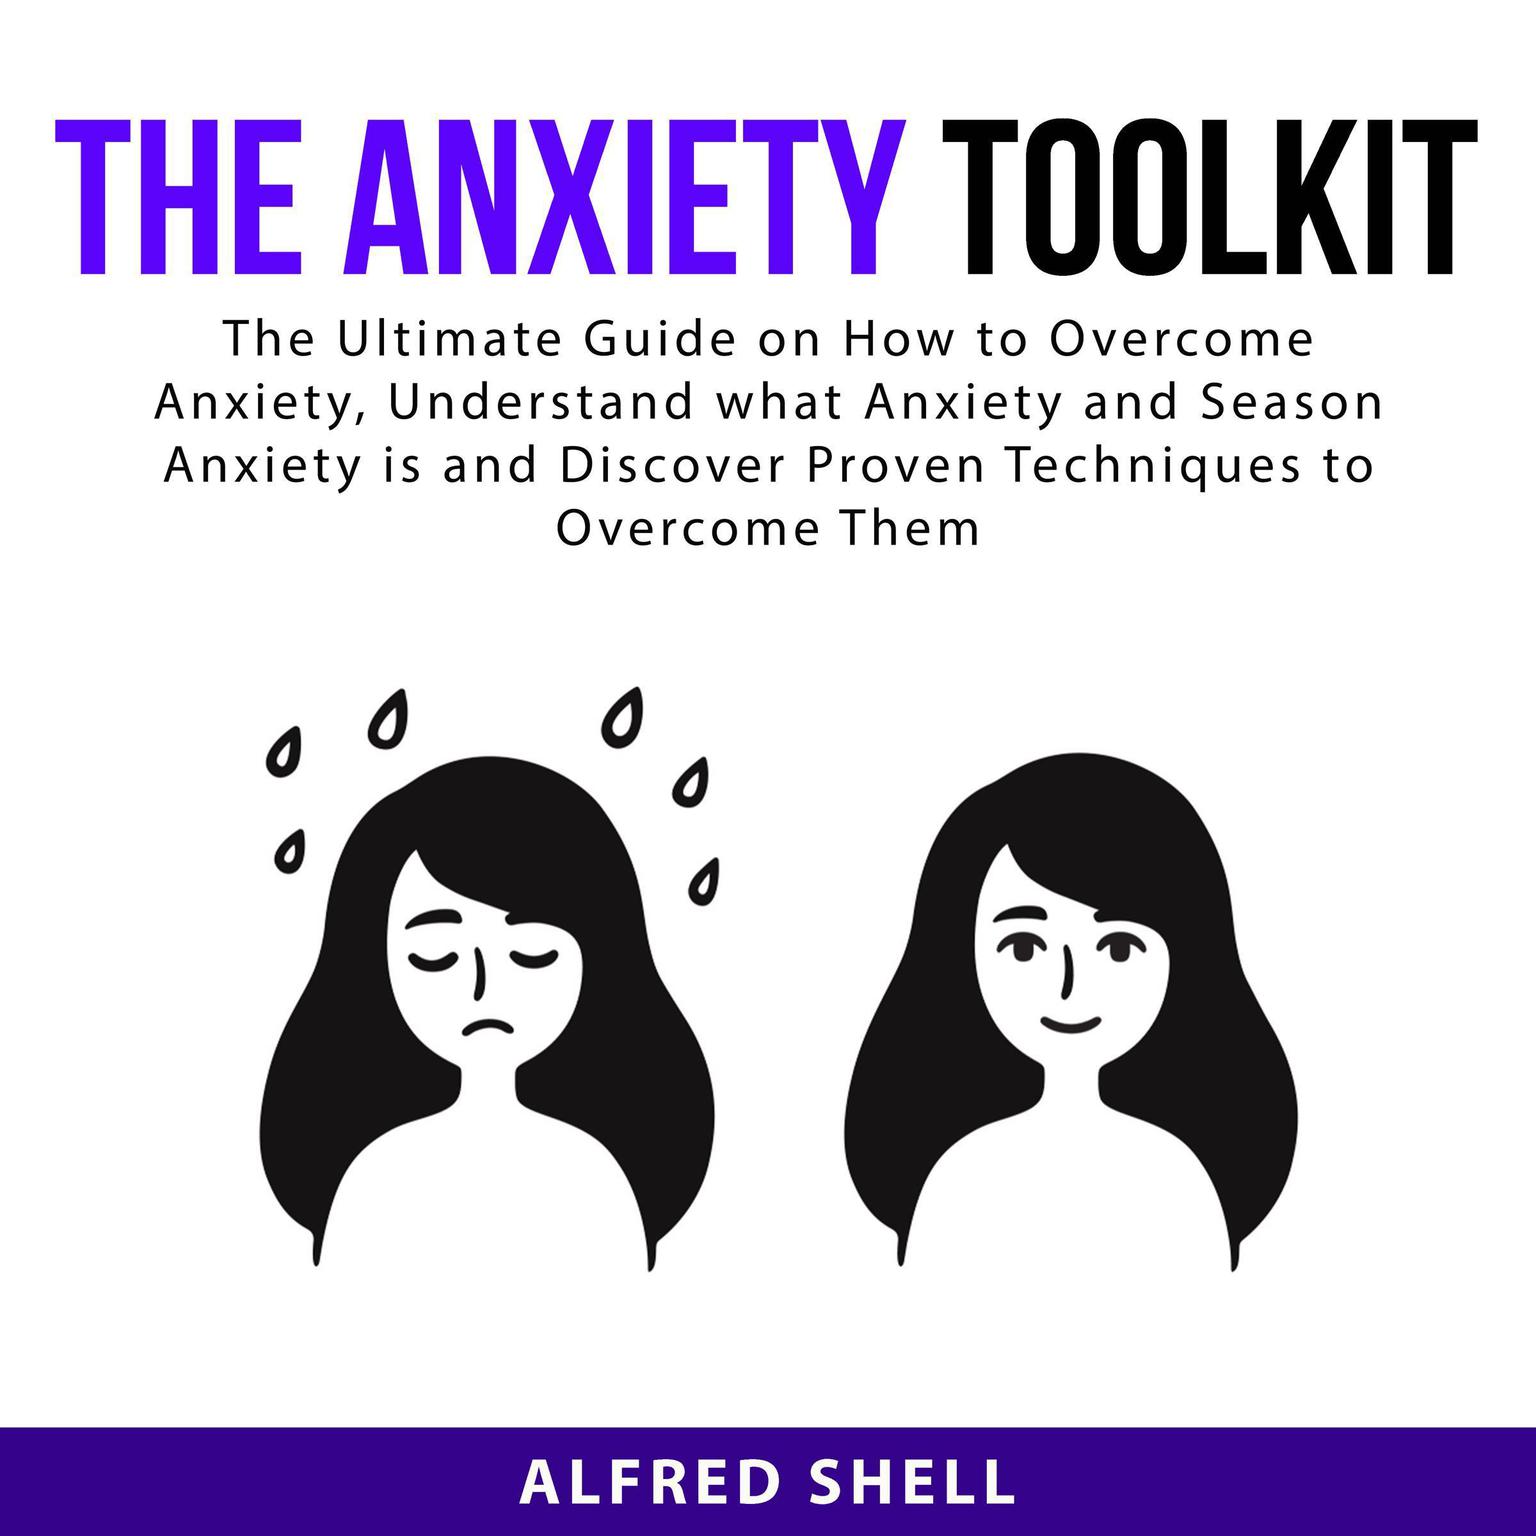 The Anxiety Toolkit: The Ultimate Guide on How to Overcome Anxiety, Understand what Anxiety and Season Anxiety is and Discover Proven Techniques to Overcome Them Audiobook, by Alfred Shell